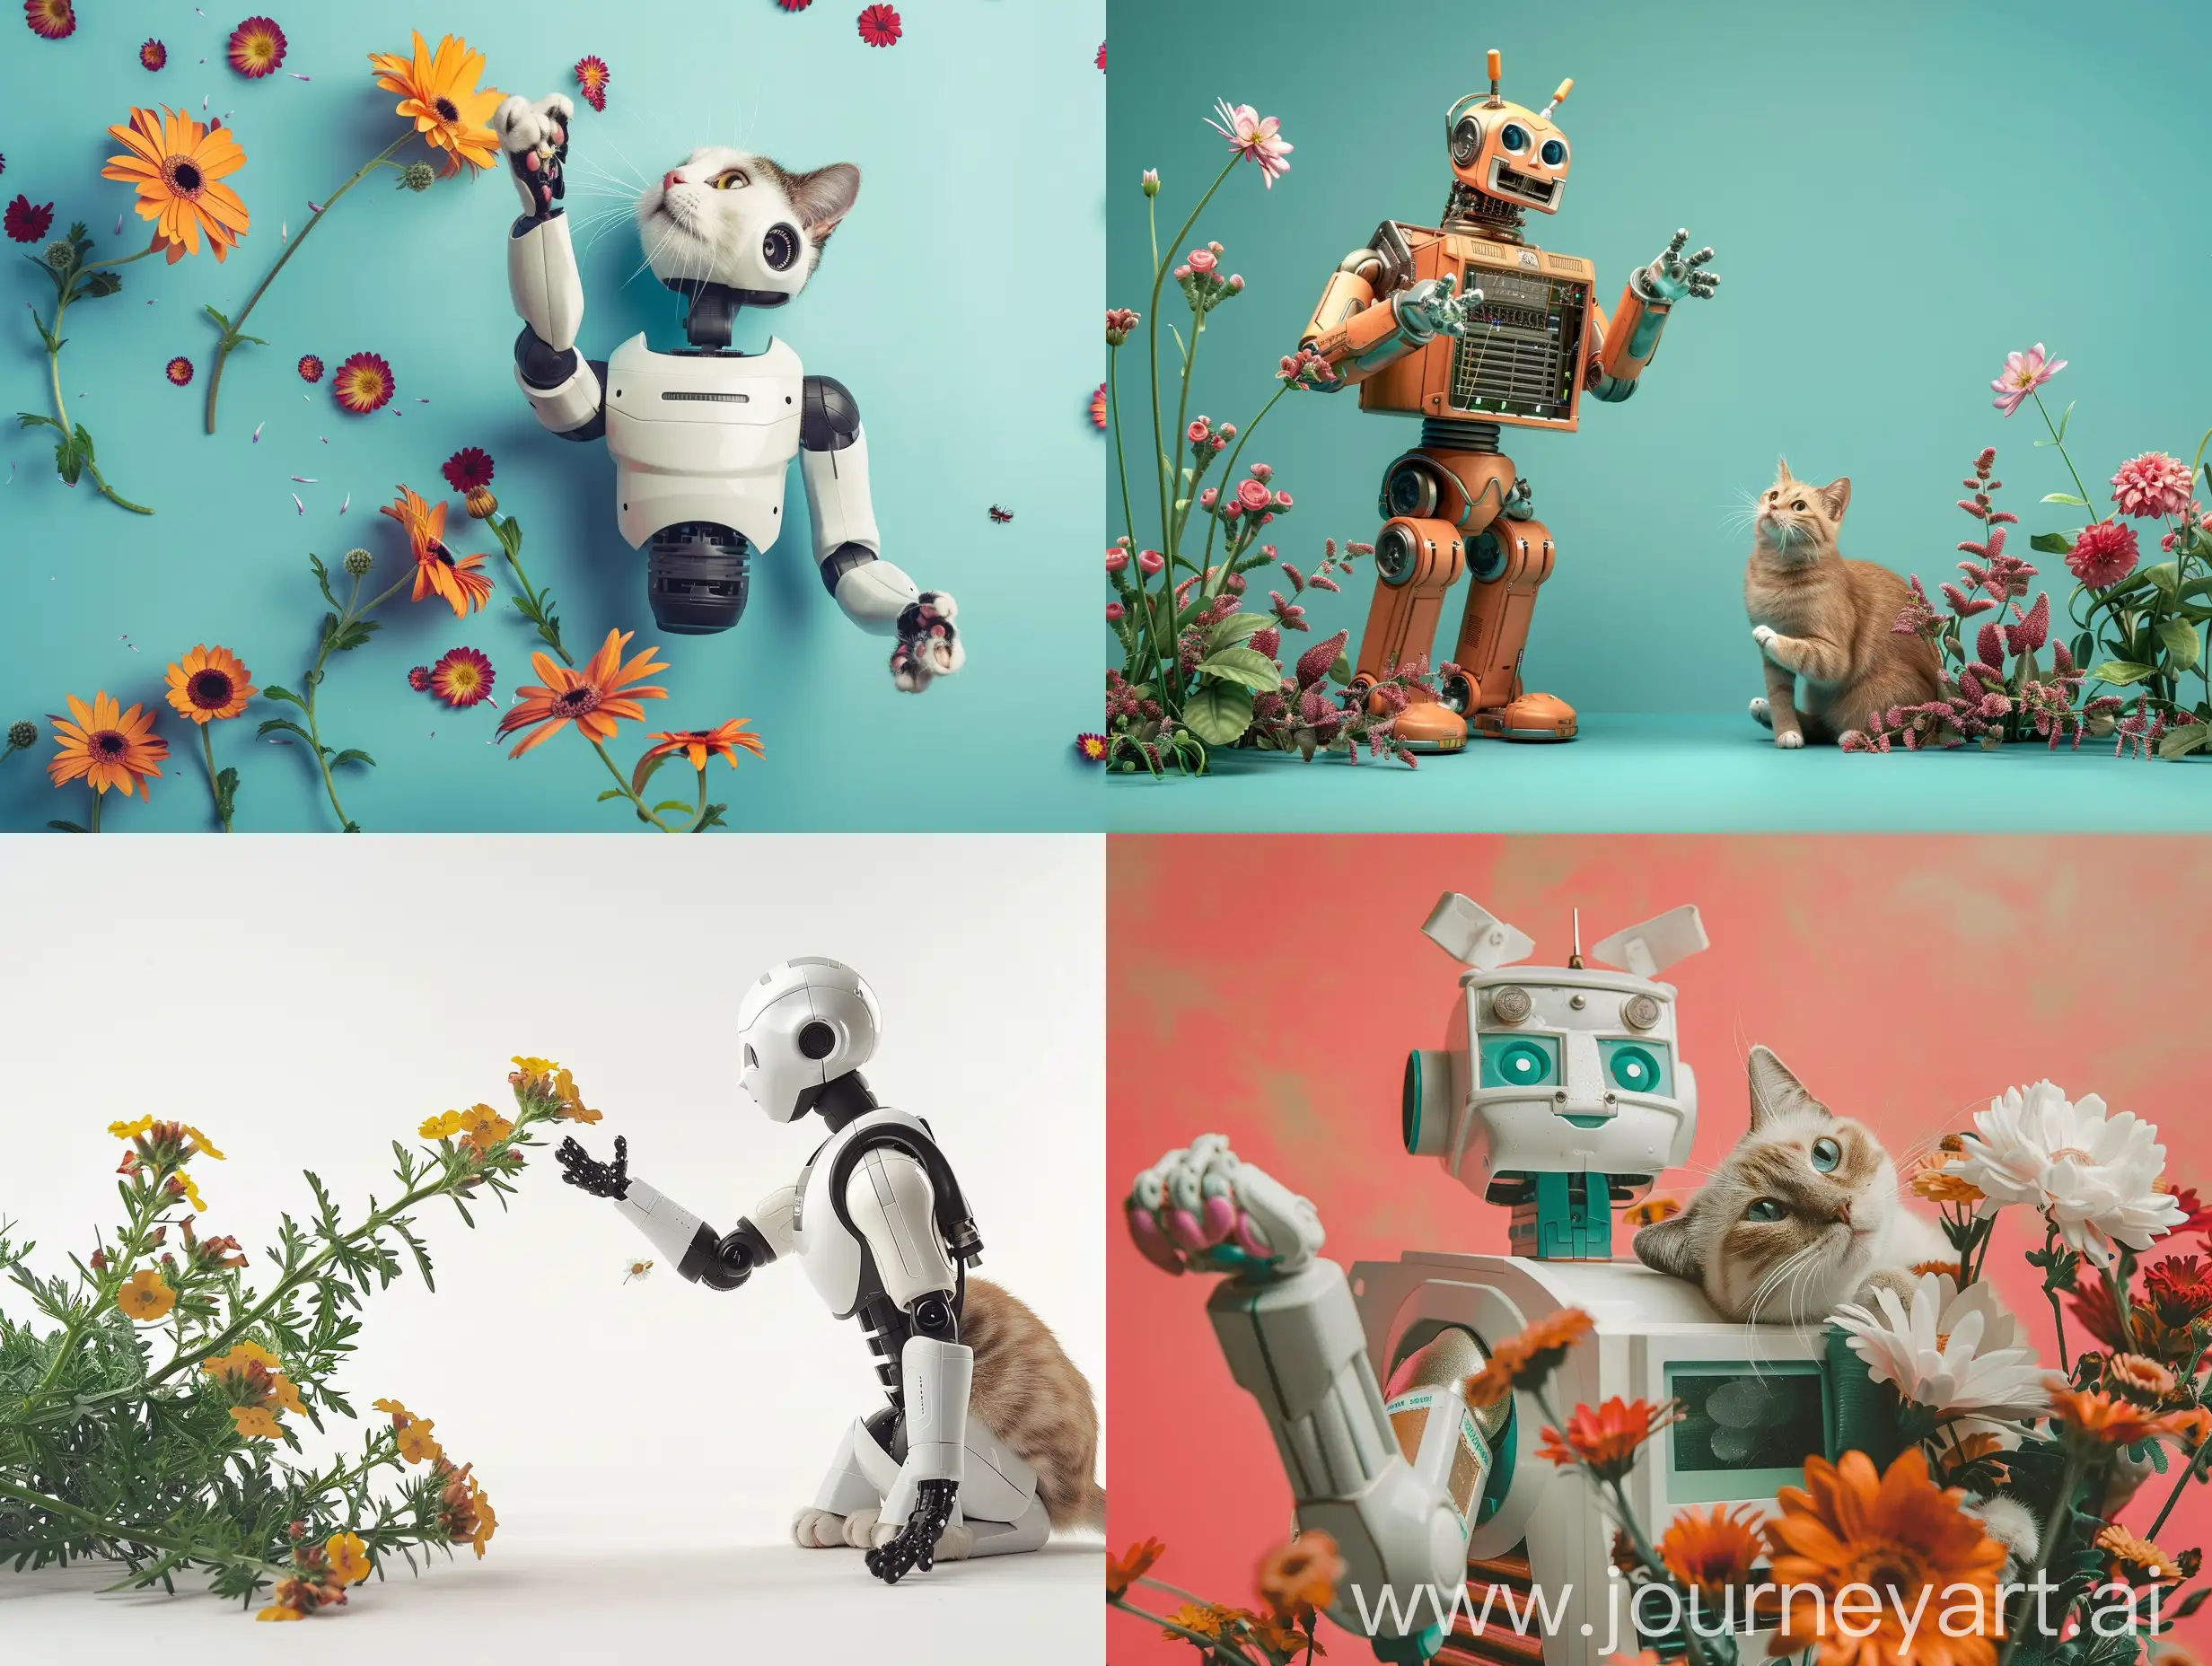 Joyful-Robot-Dancing-Amidst-Playful-Flowers-with-a-Whimsical-Cat